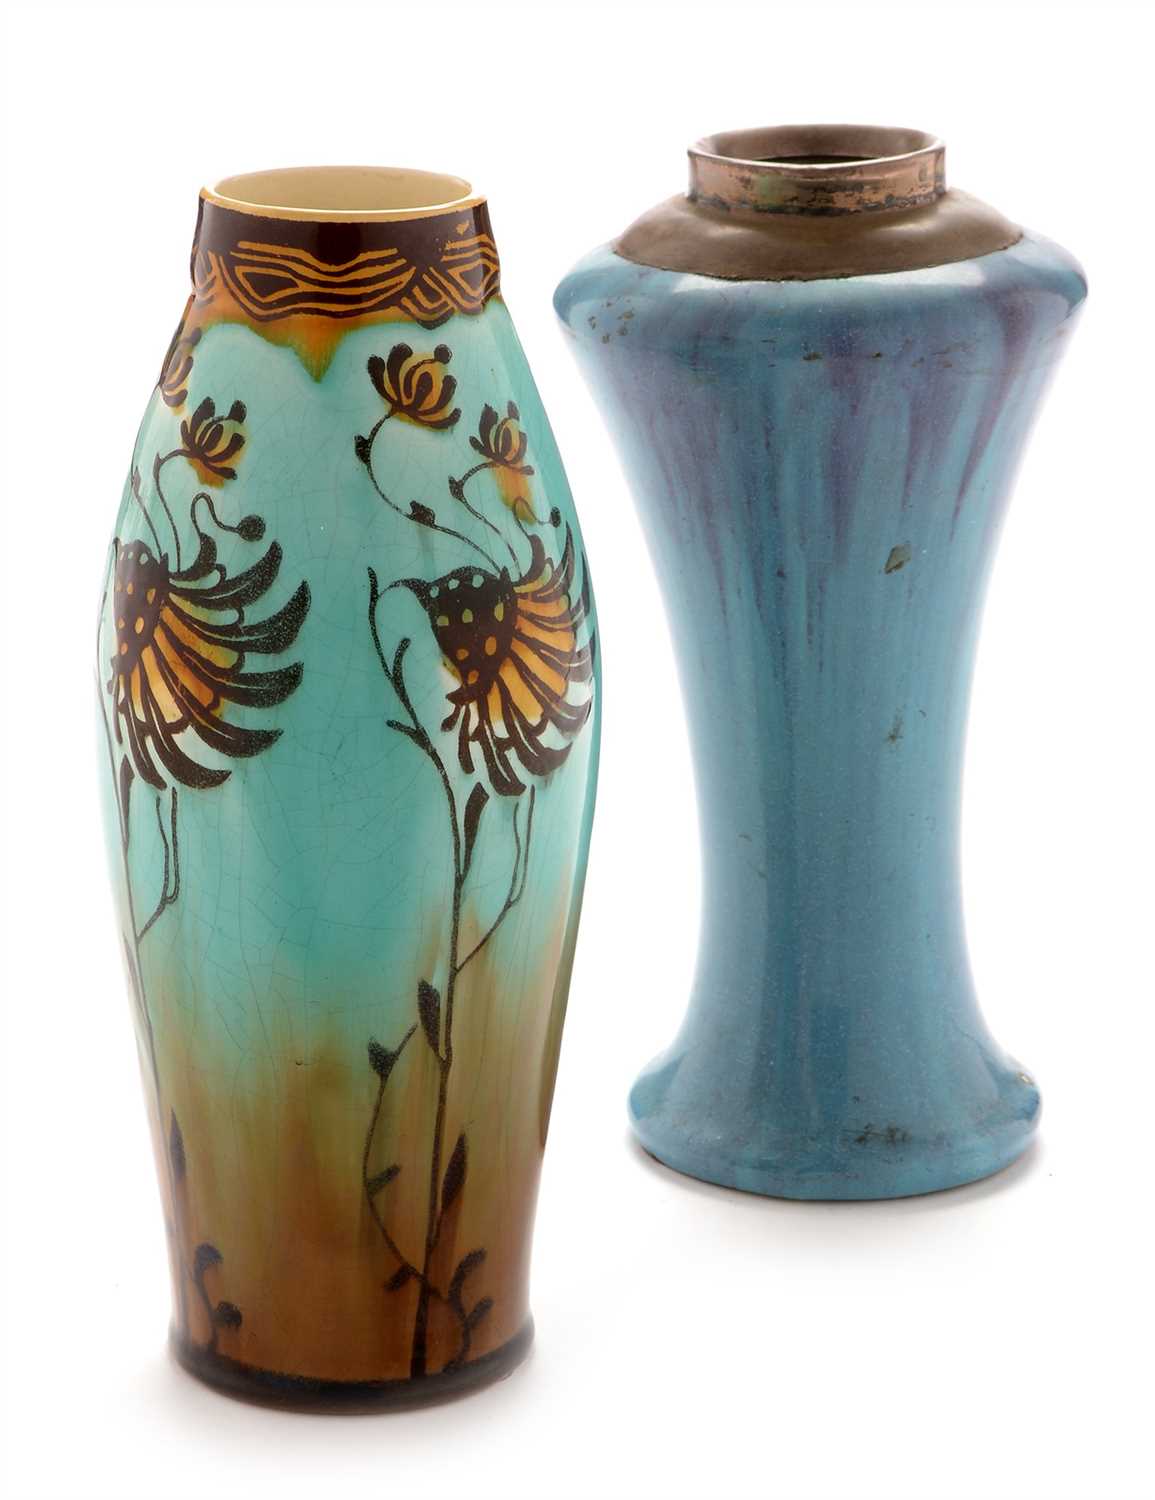 Lot 540 - Minton secessionist vase; and a silver-mounted Art pottery vase.